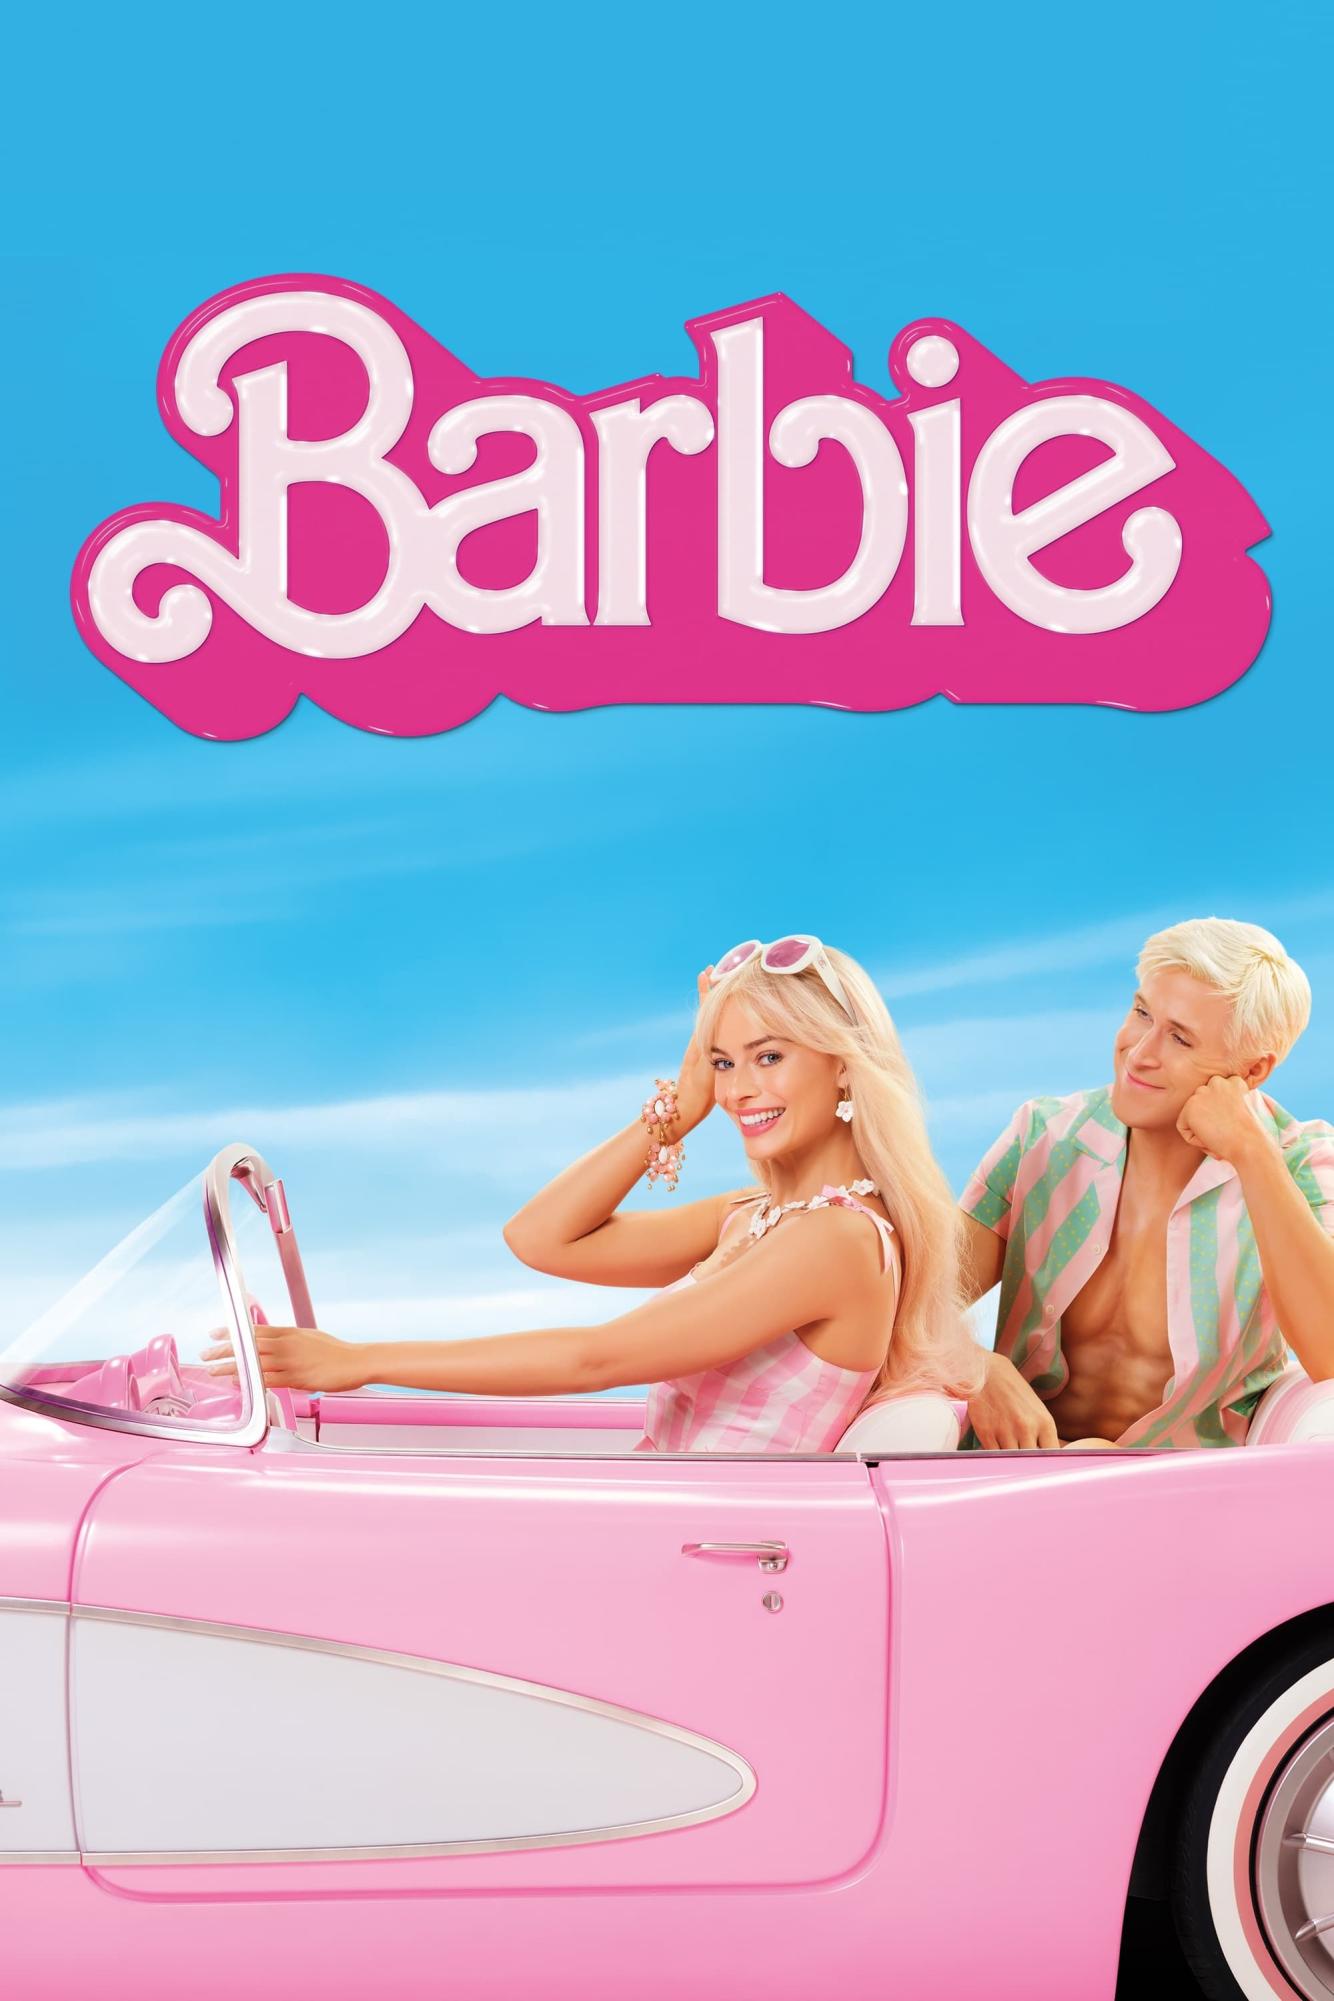 Horses and High Heels: The Barbie Movie